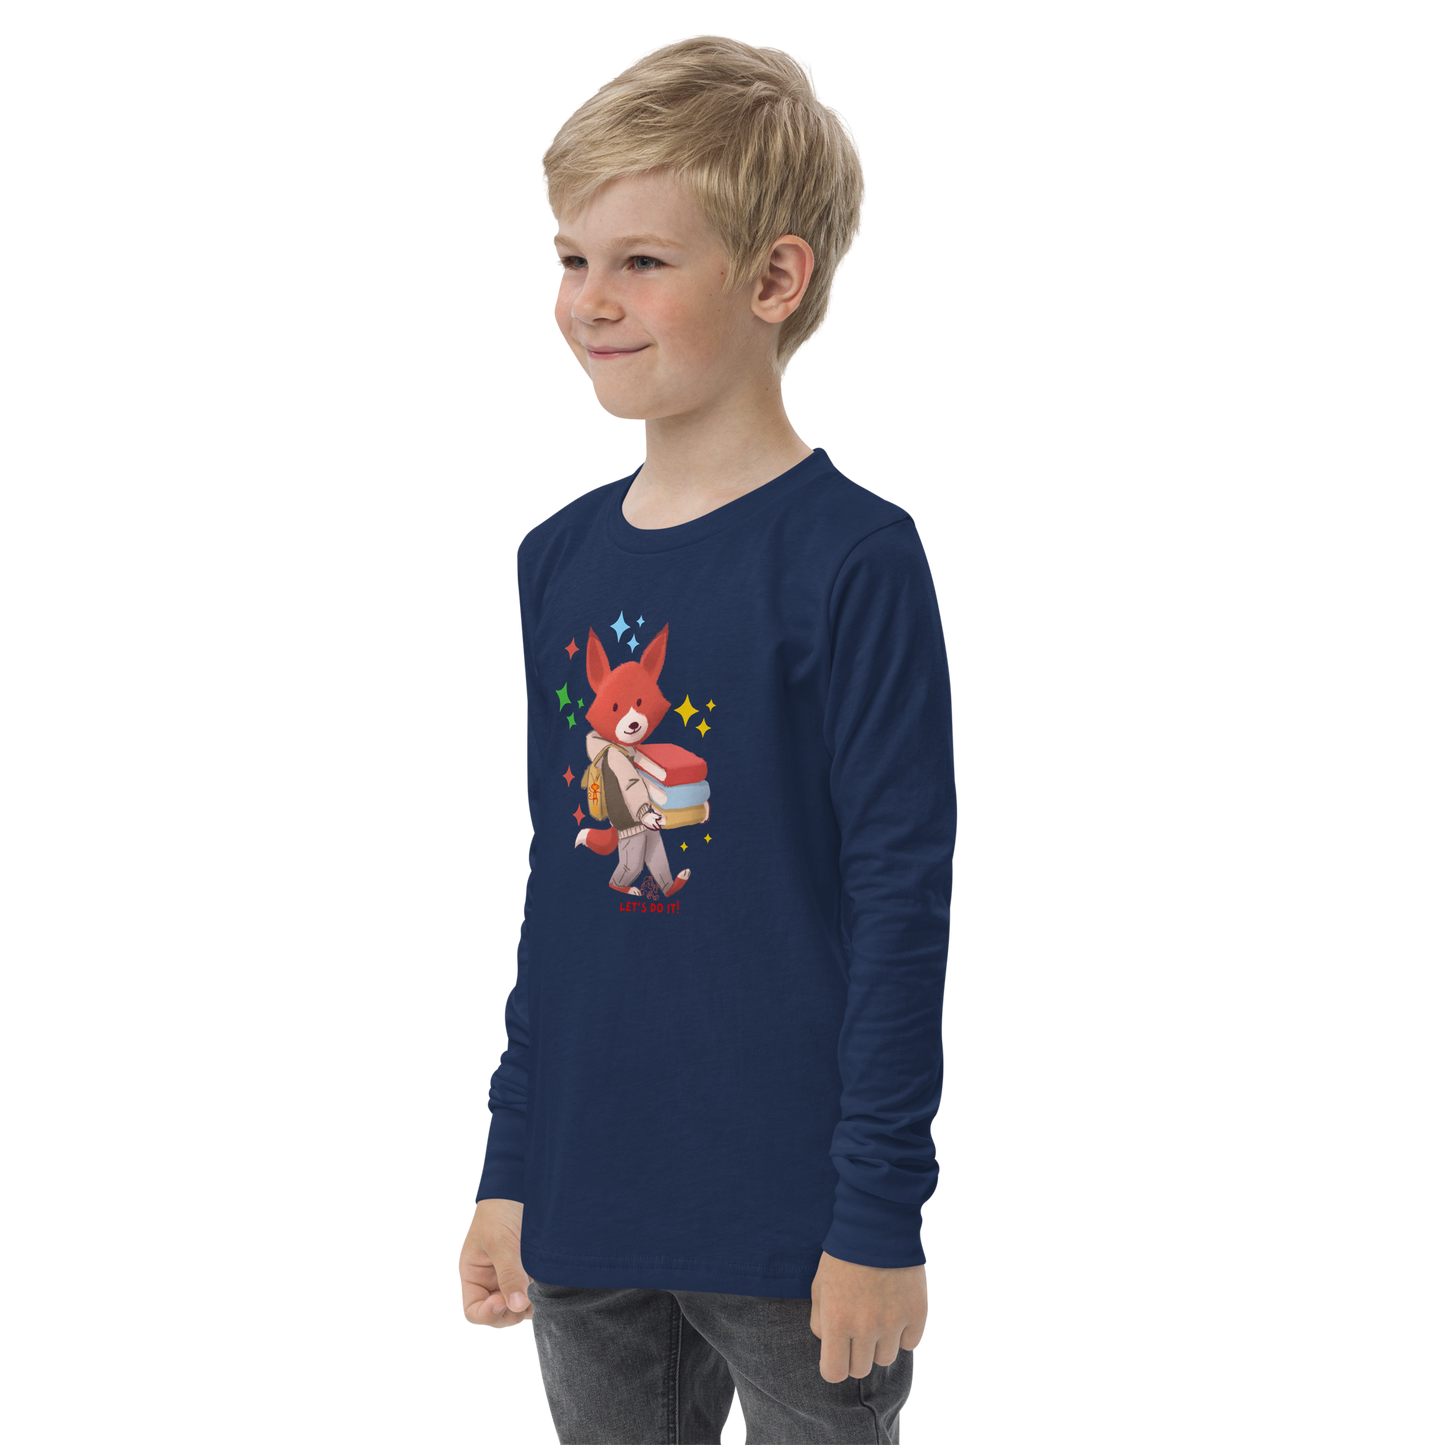 Let's Do It Tiger long sleeve youth t-shirt